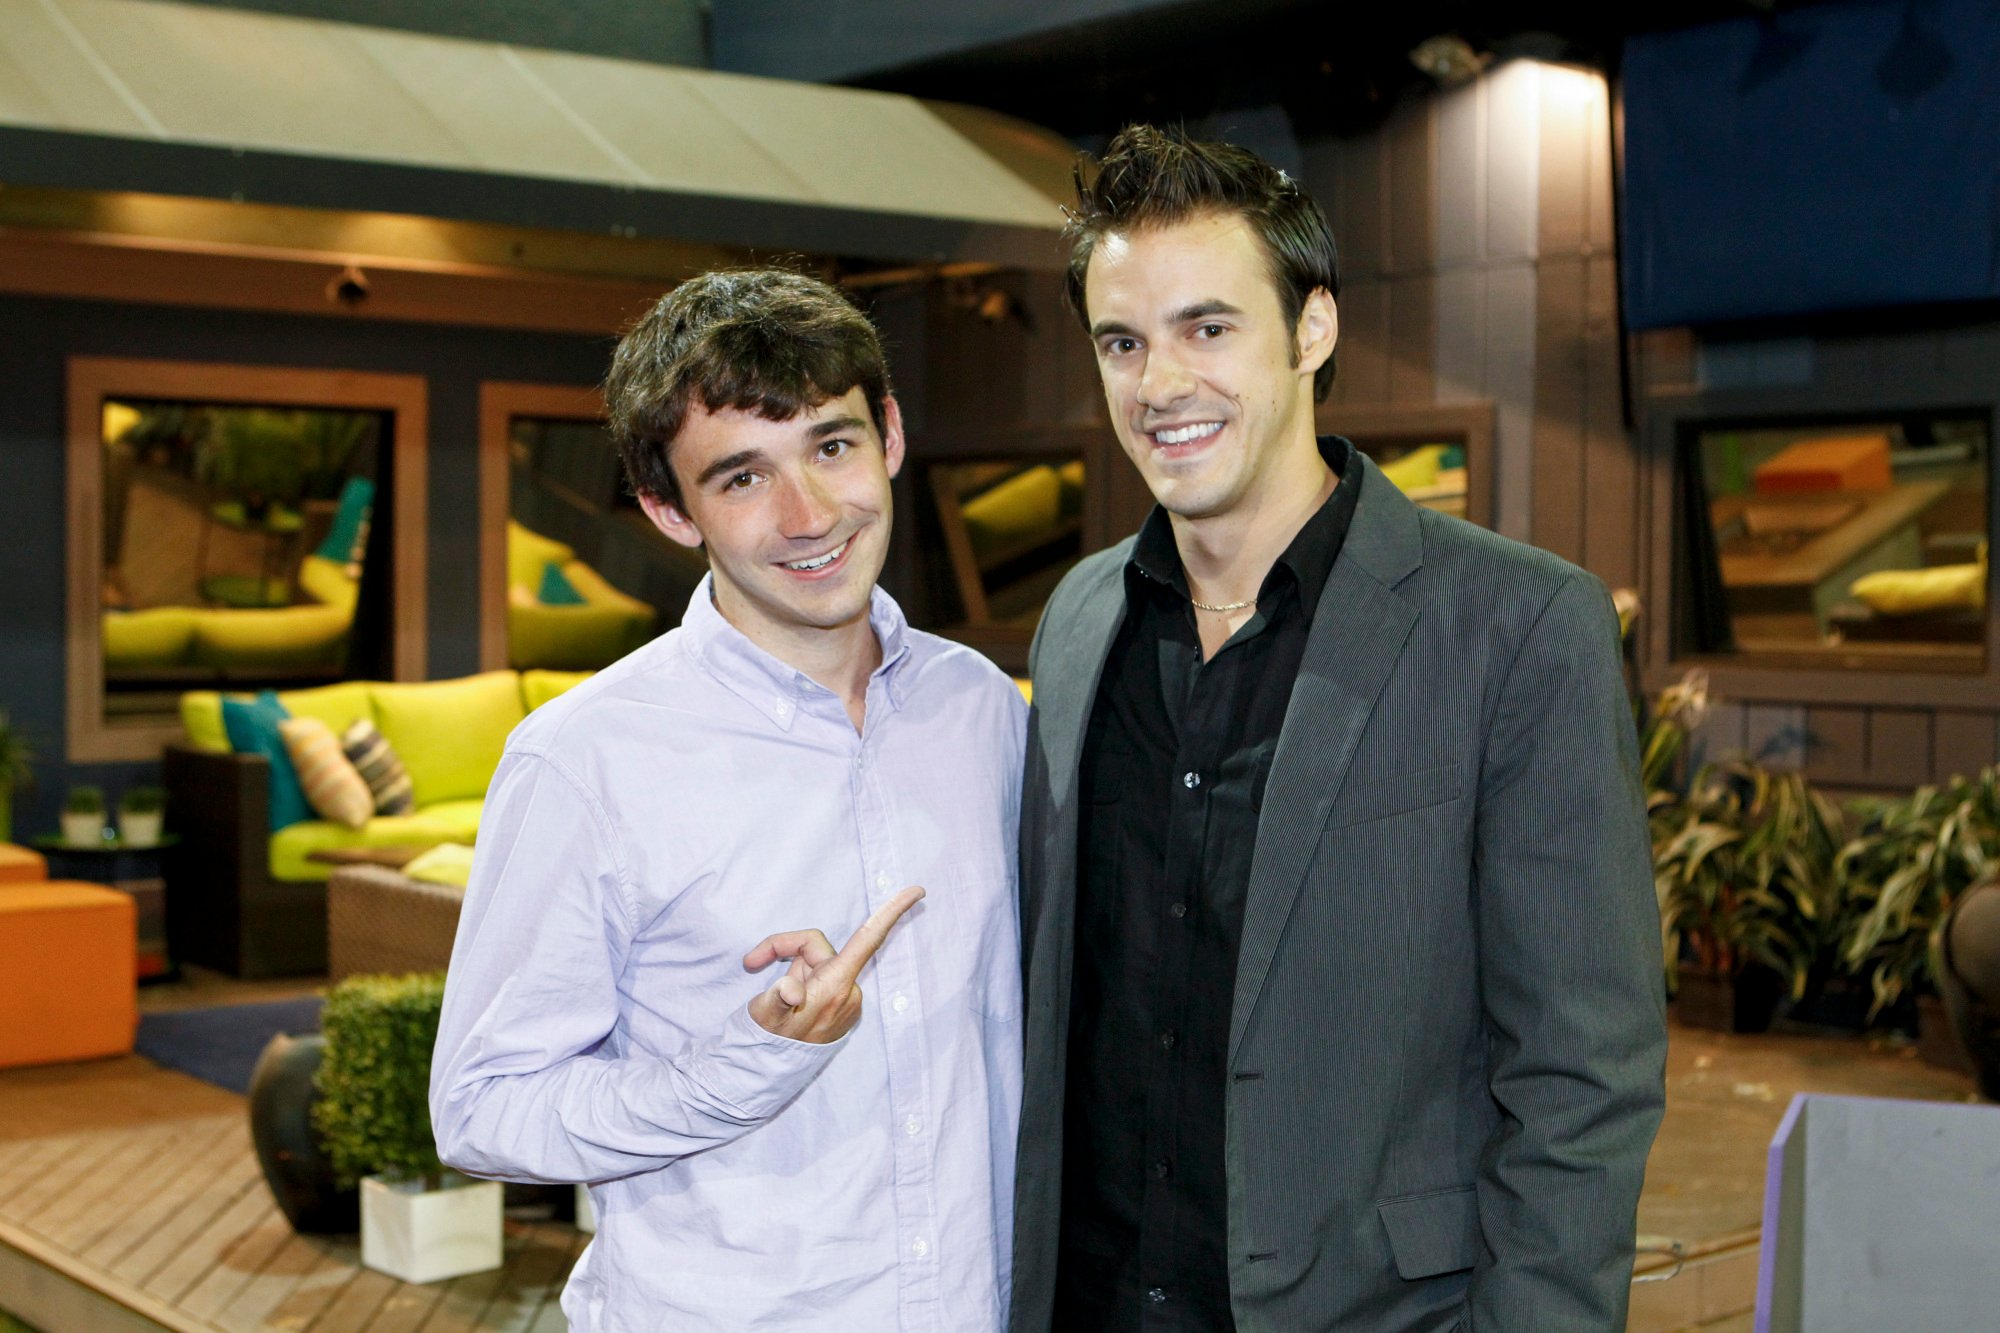 After wining the $500,000 grand prize, Ian Terry (left) poses next to runner-up, Dan Gheesling, on the Big Brother Finale